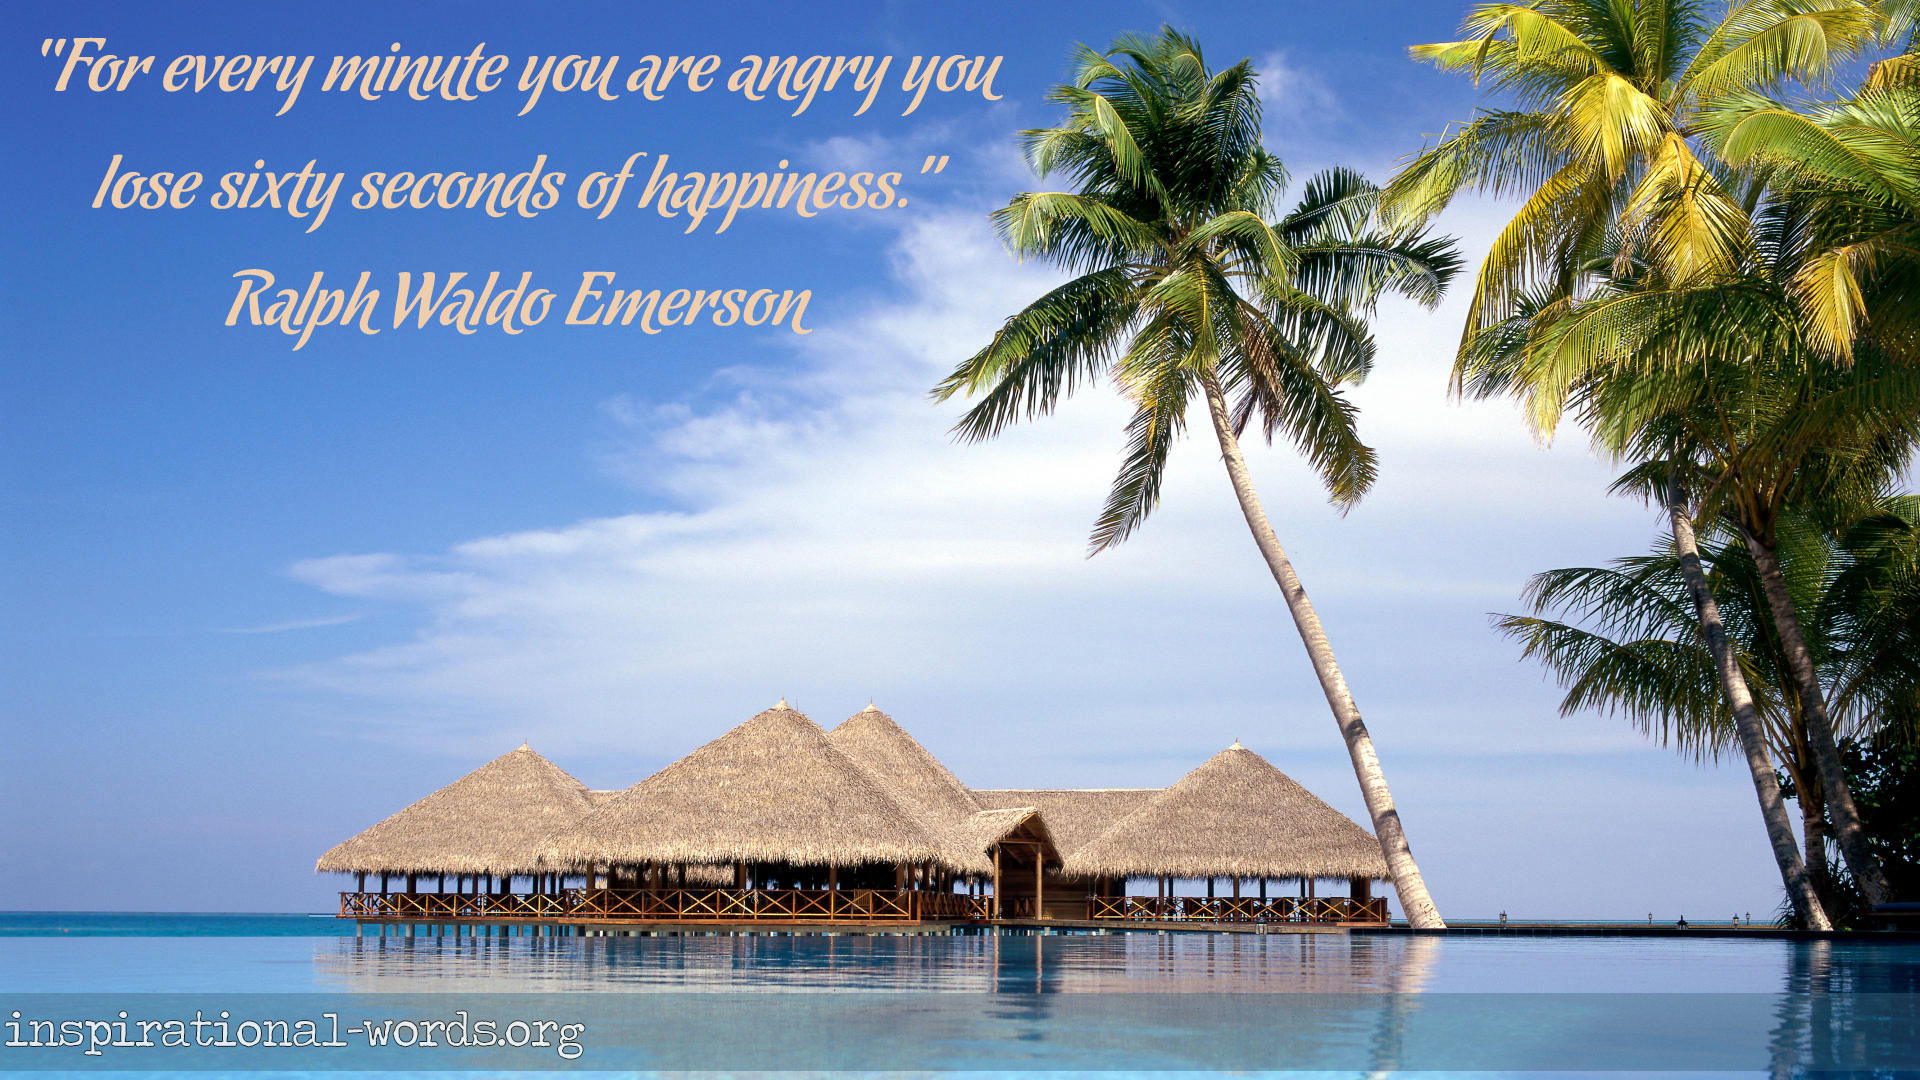 Inspirational Wallpaper Quote By Ralph Waldo Emerson